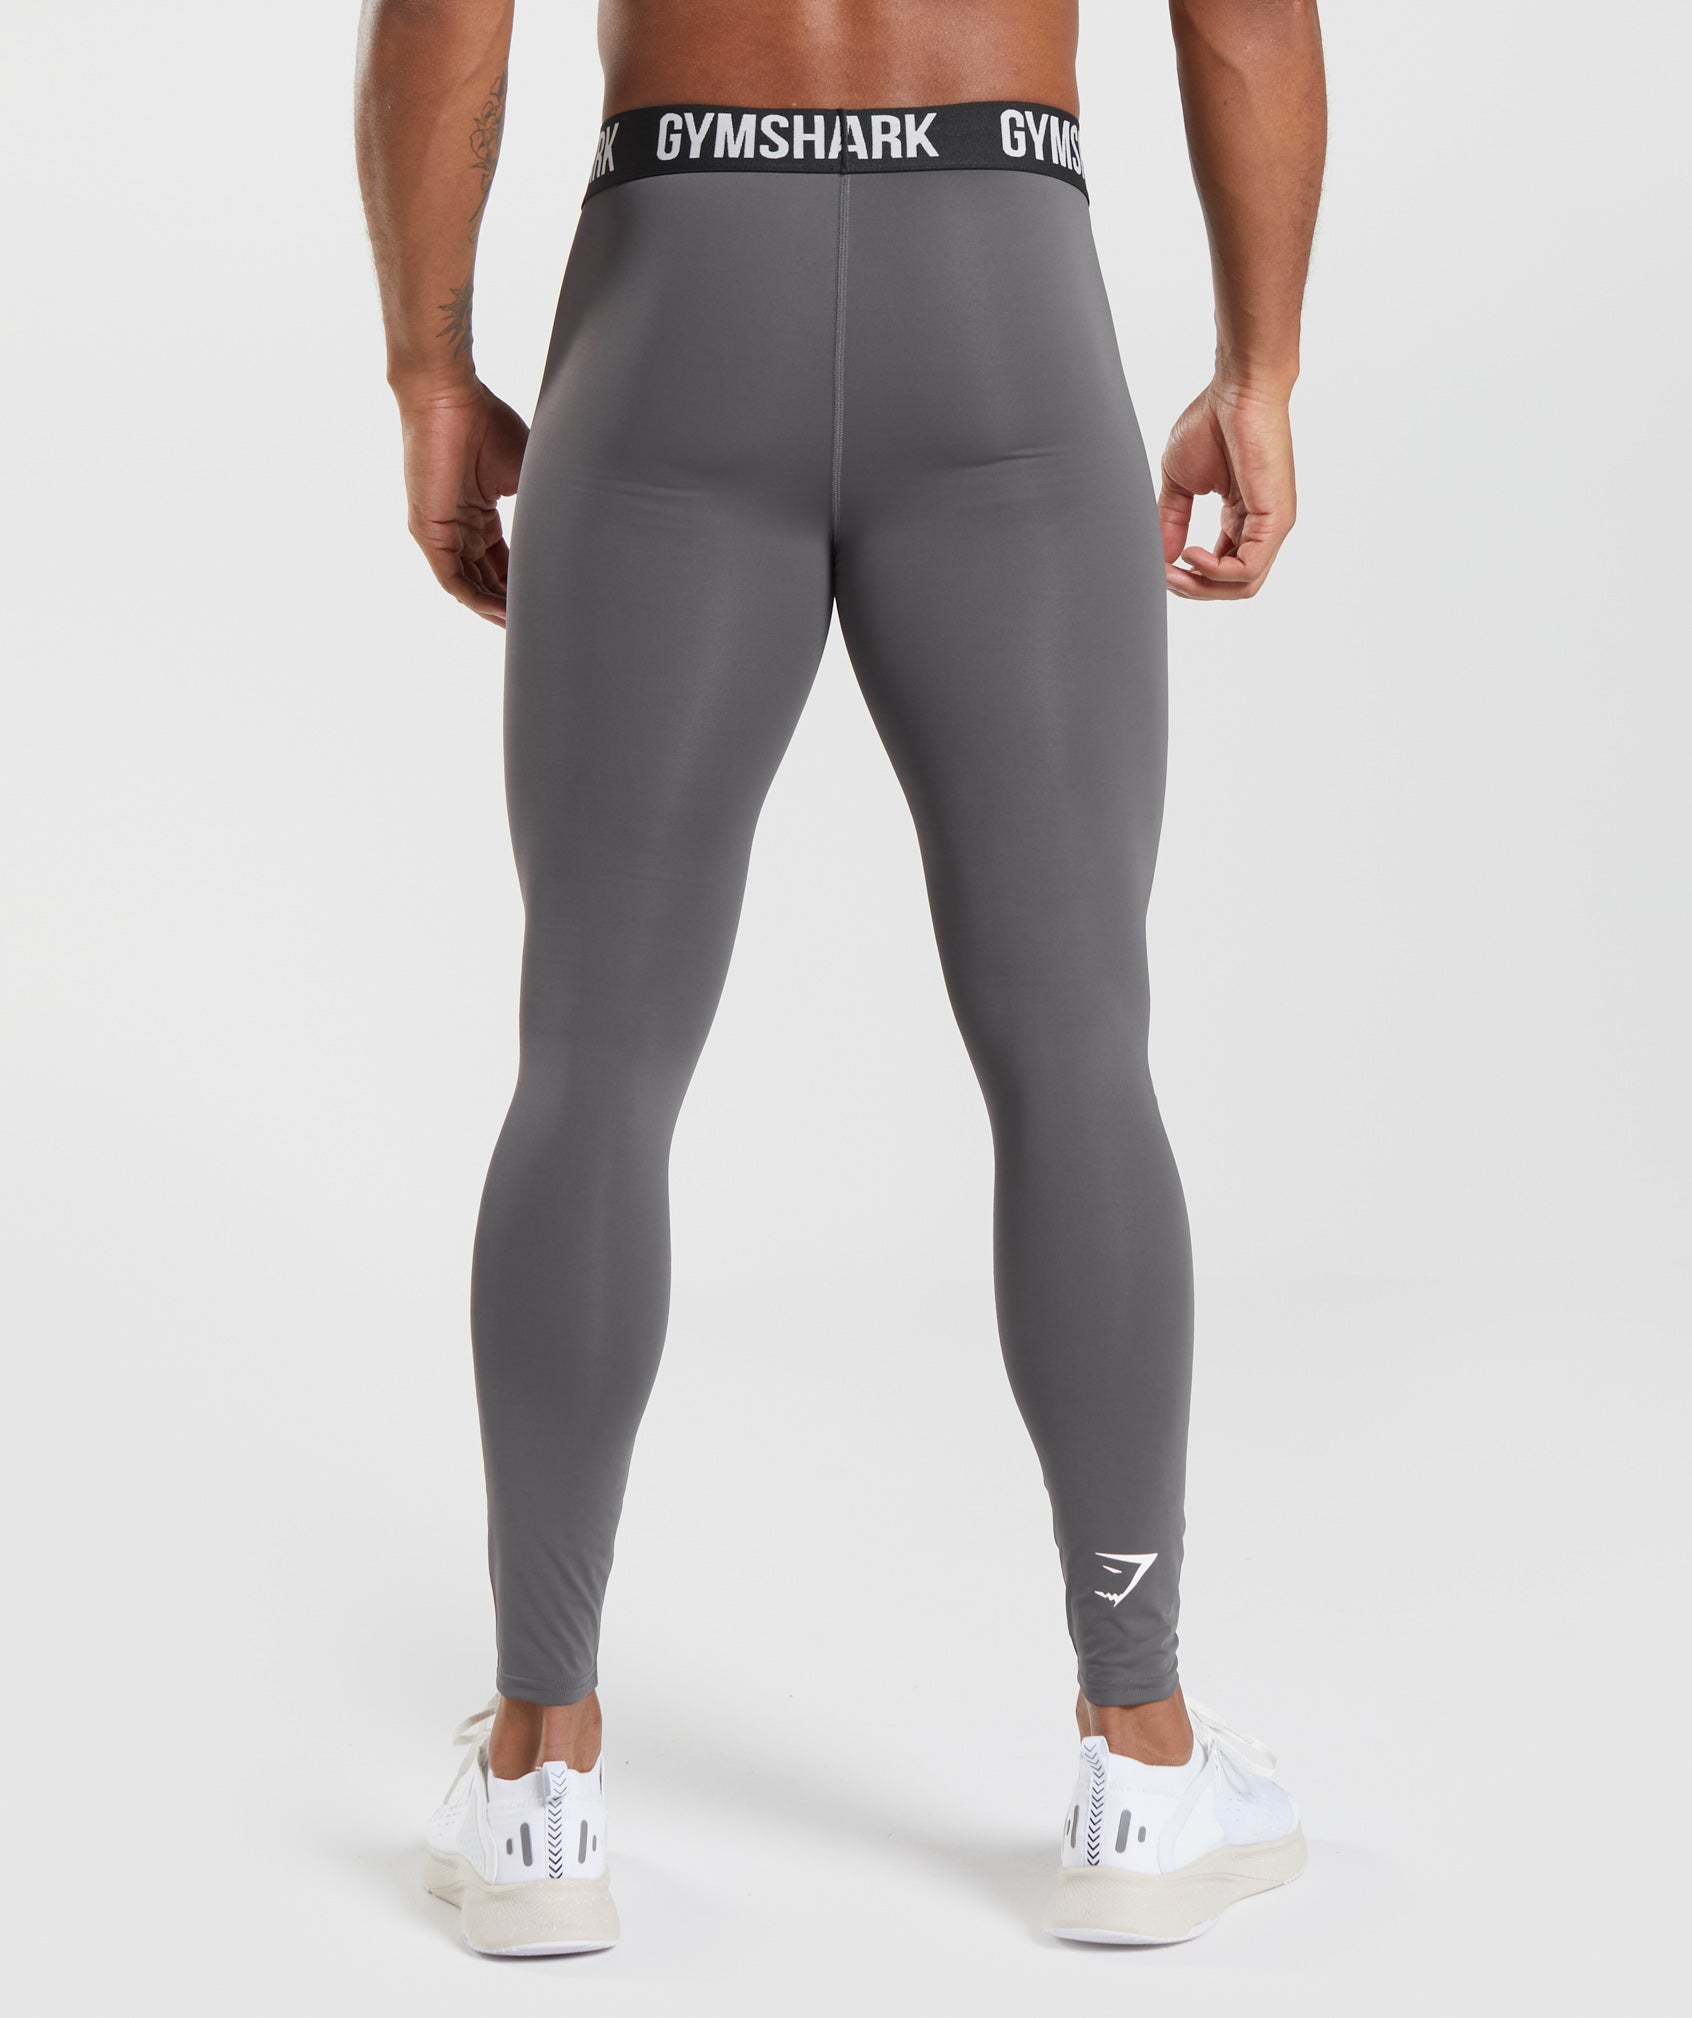 Sportswear Tights For Men  Fitness Tights For Gym - OMG